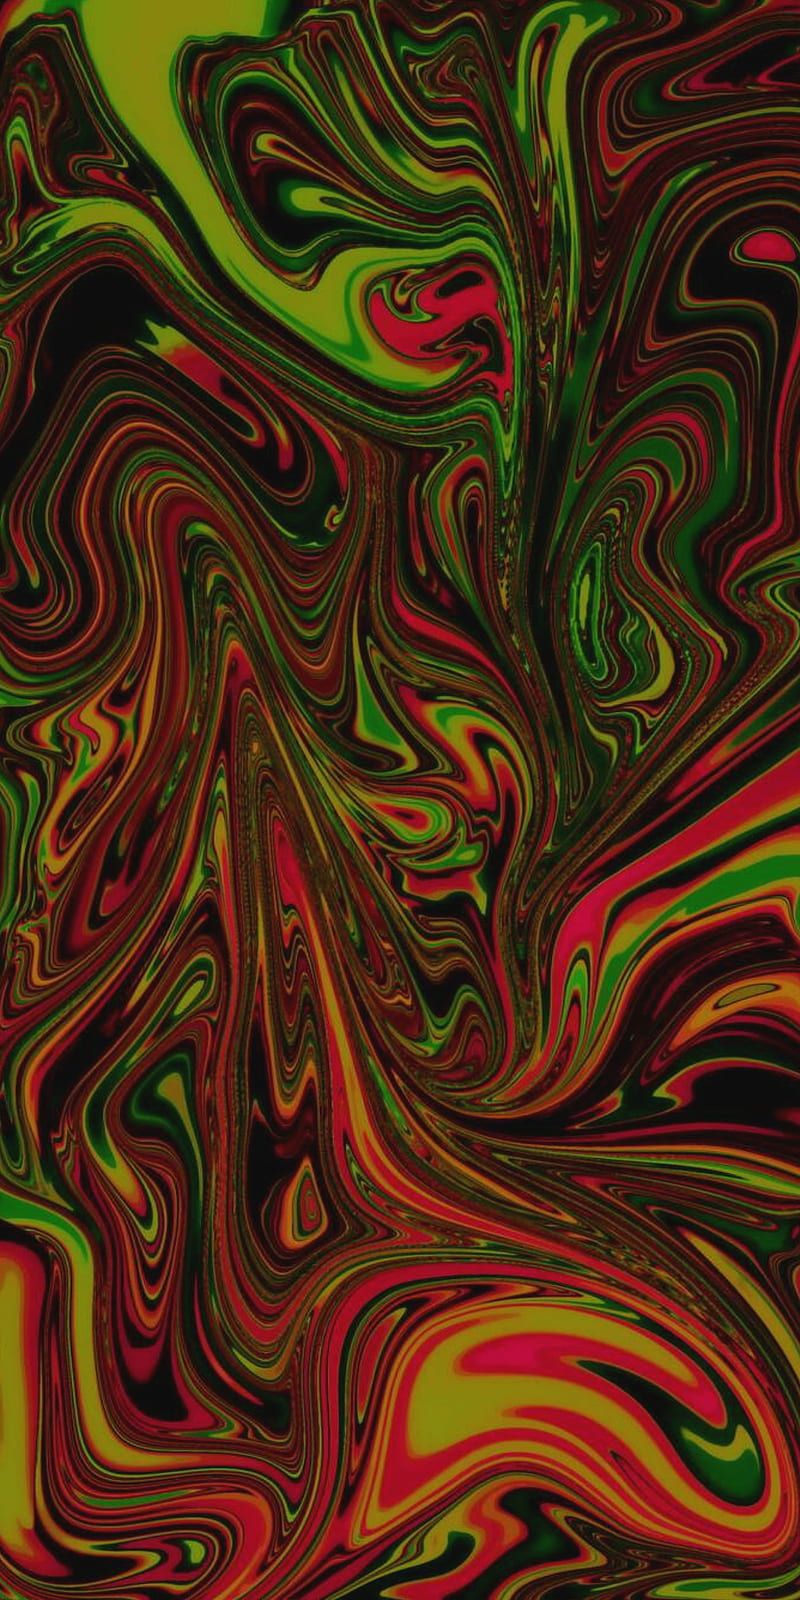 An abstract image of green, red and black - Psychedelic